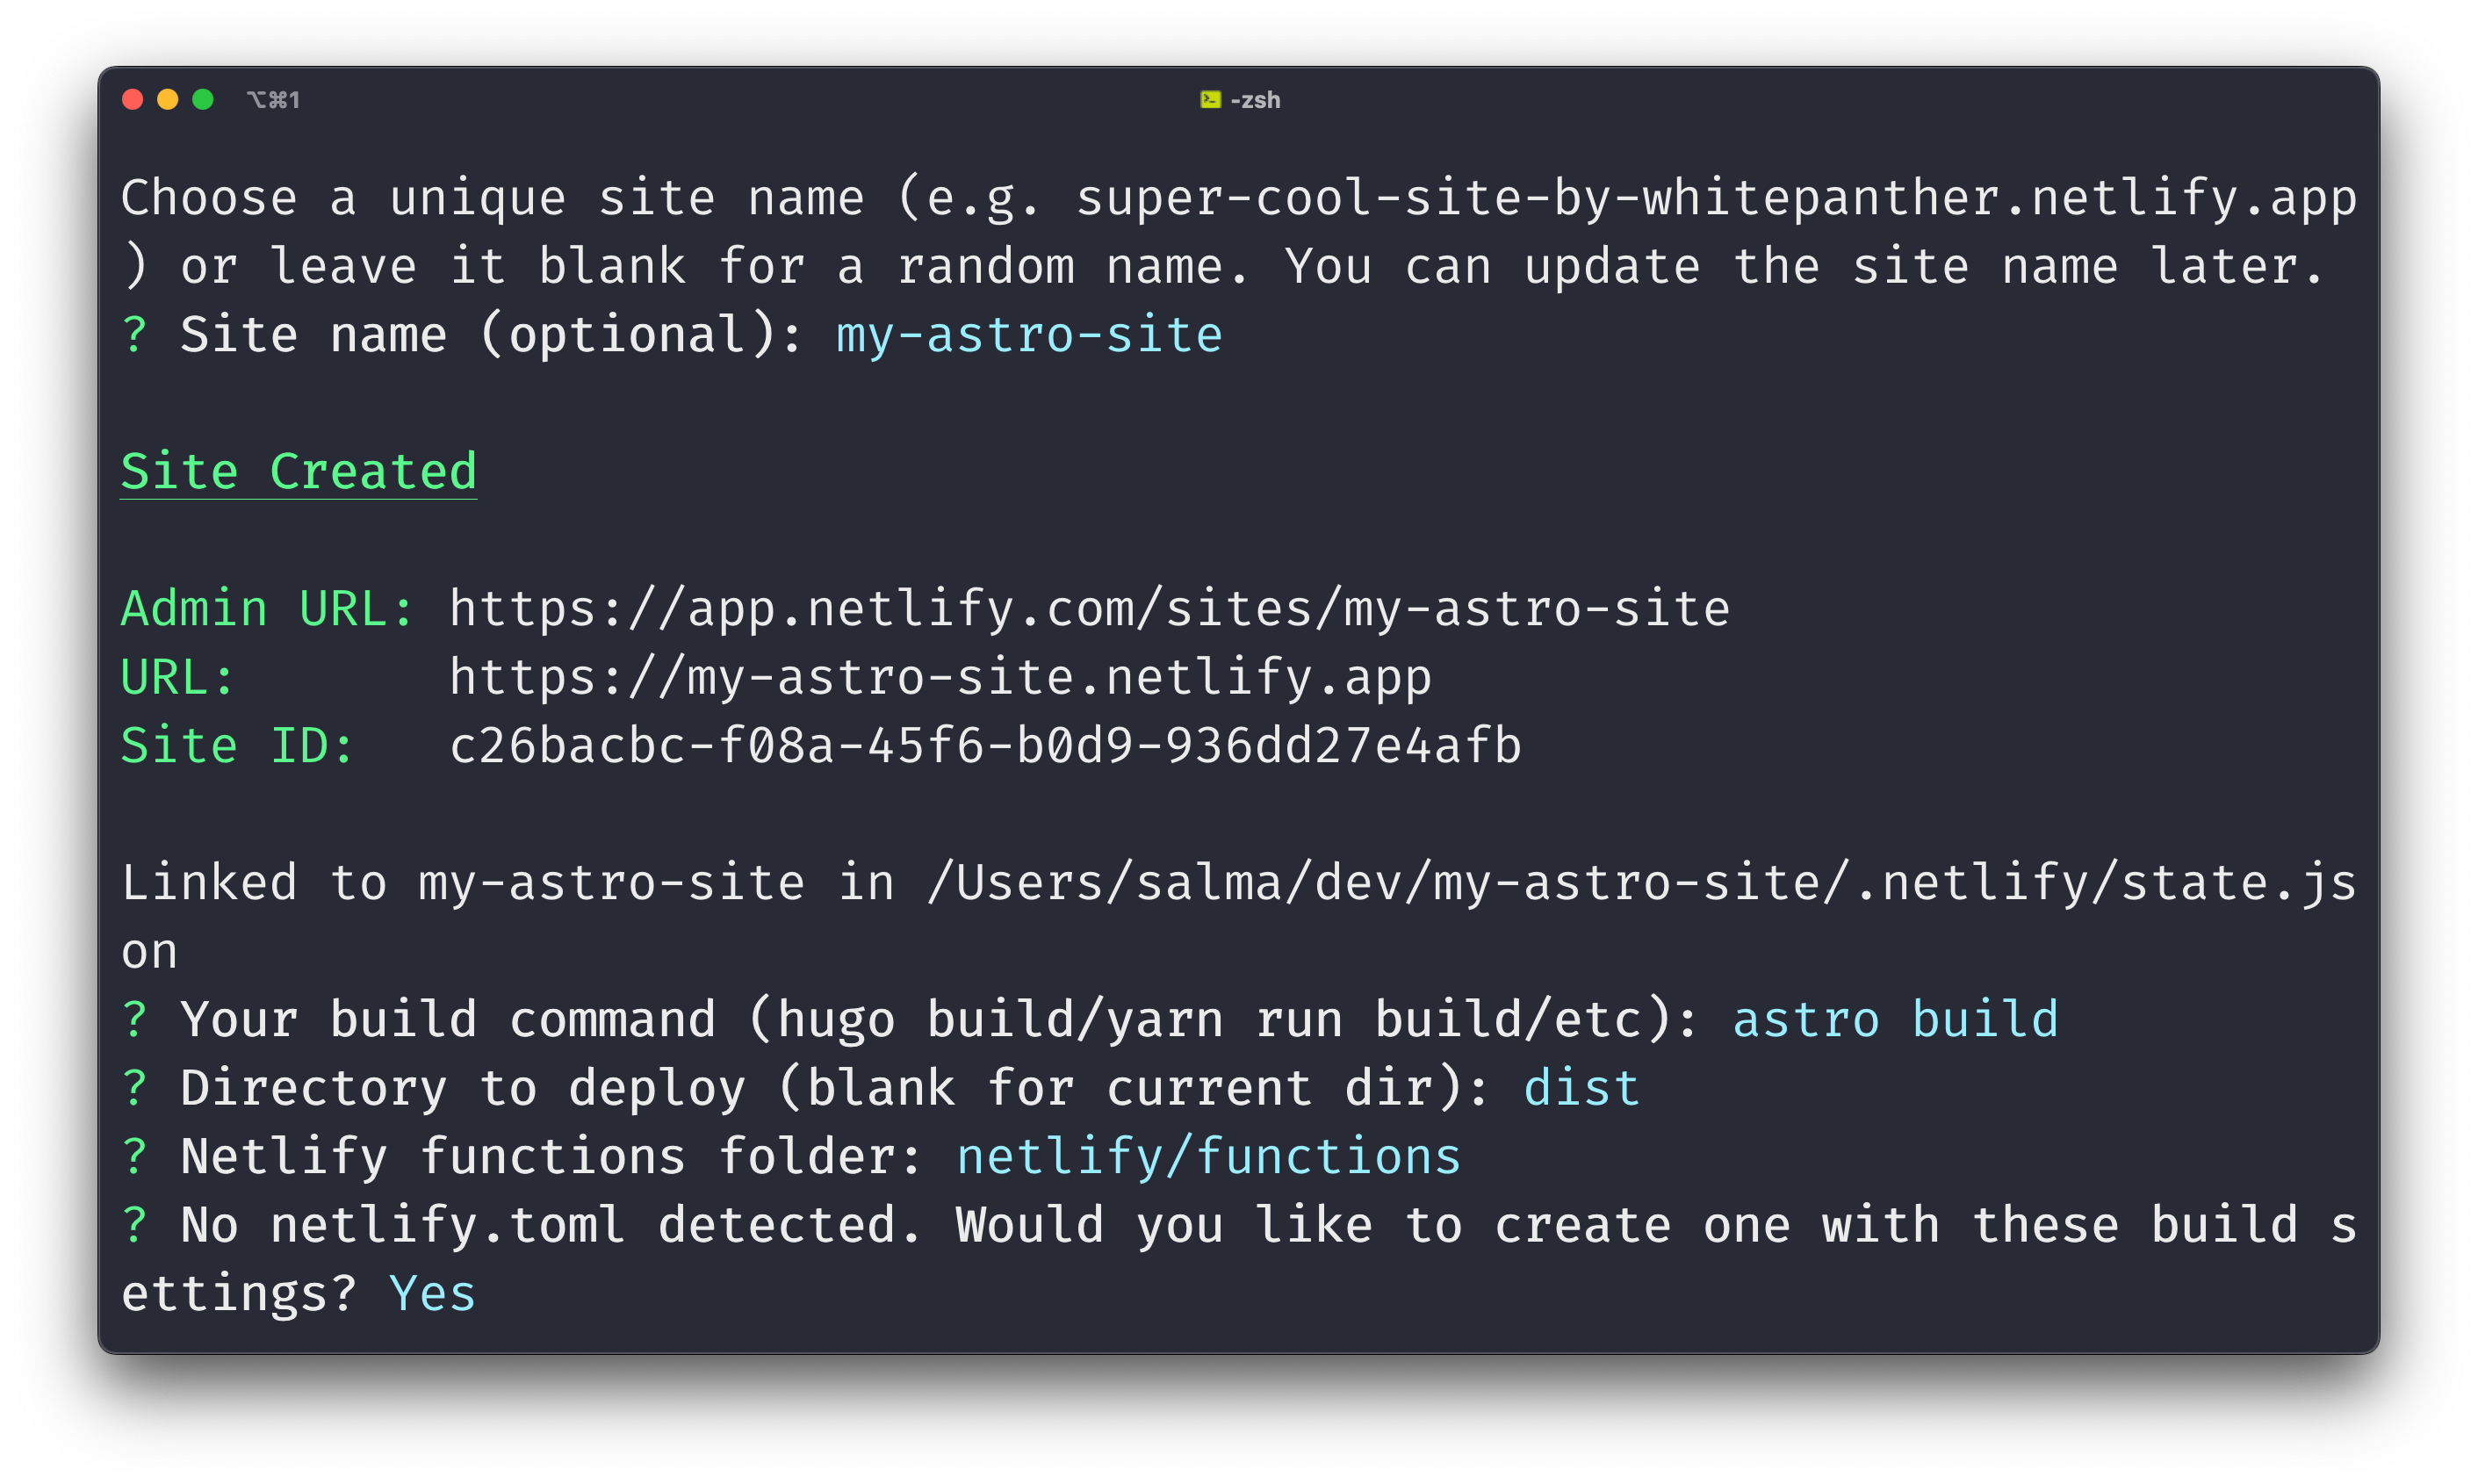 All configuration has been auto-detected and confirmed. I have chosen to create a Netlify toml file